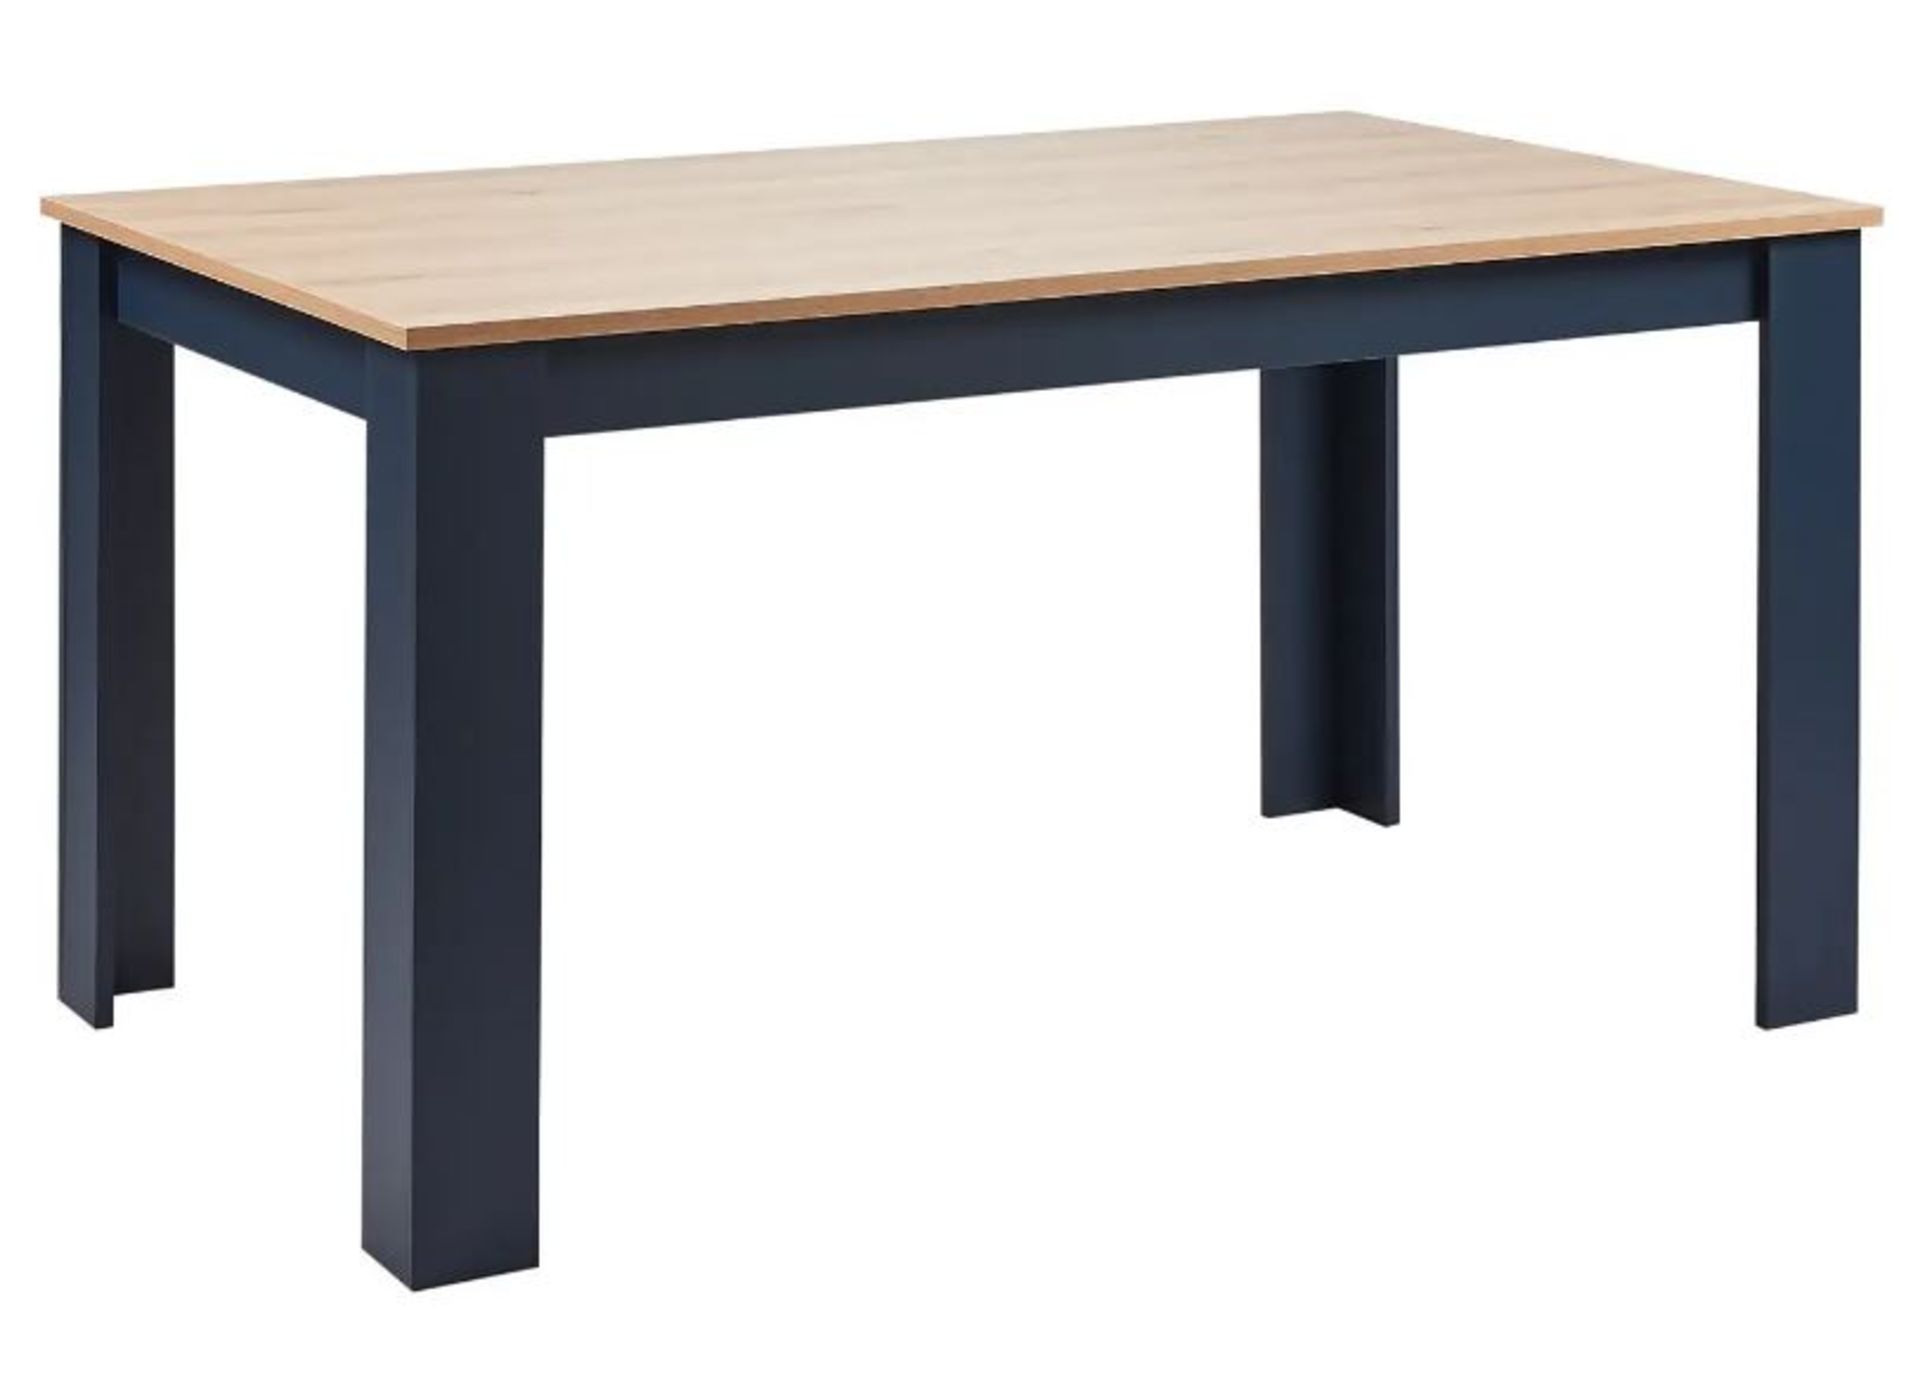 1x Marcy Dining Table Midnight. Midnight Finish With Oak Effect Top/ (H75x W150x D90cm). Unit Opene